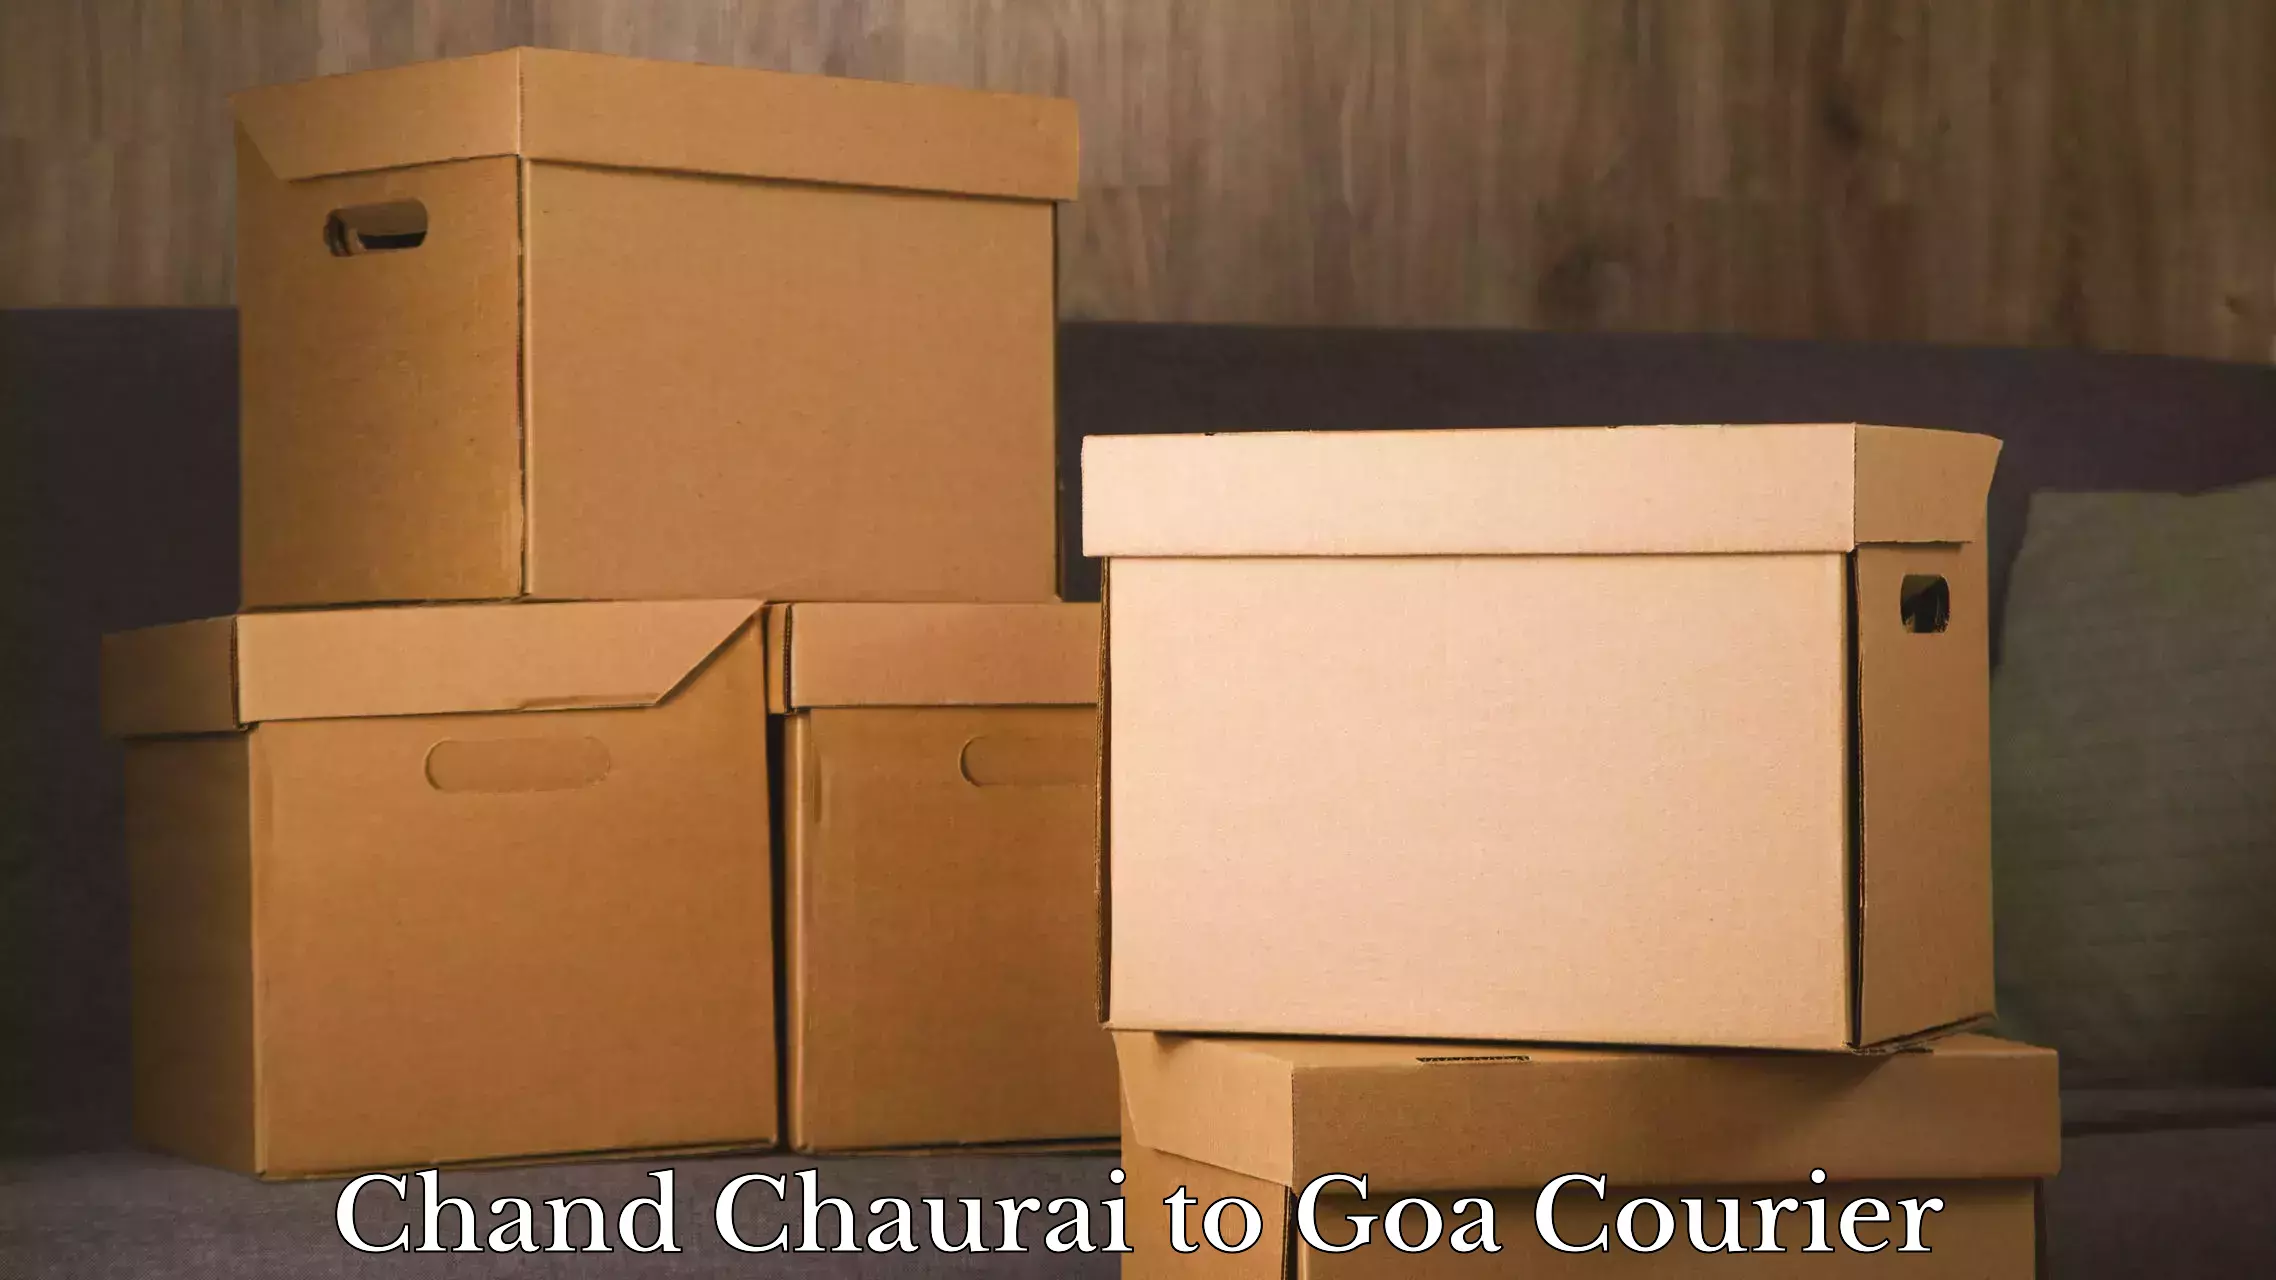 Door to door luggage delivery Chand Chaurai to Goa